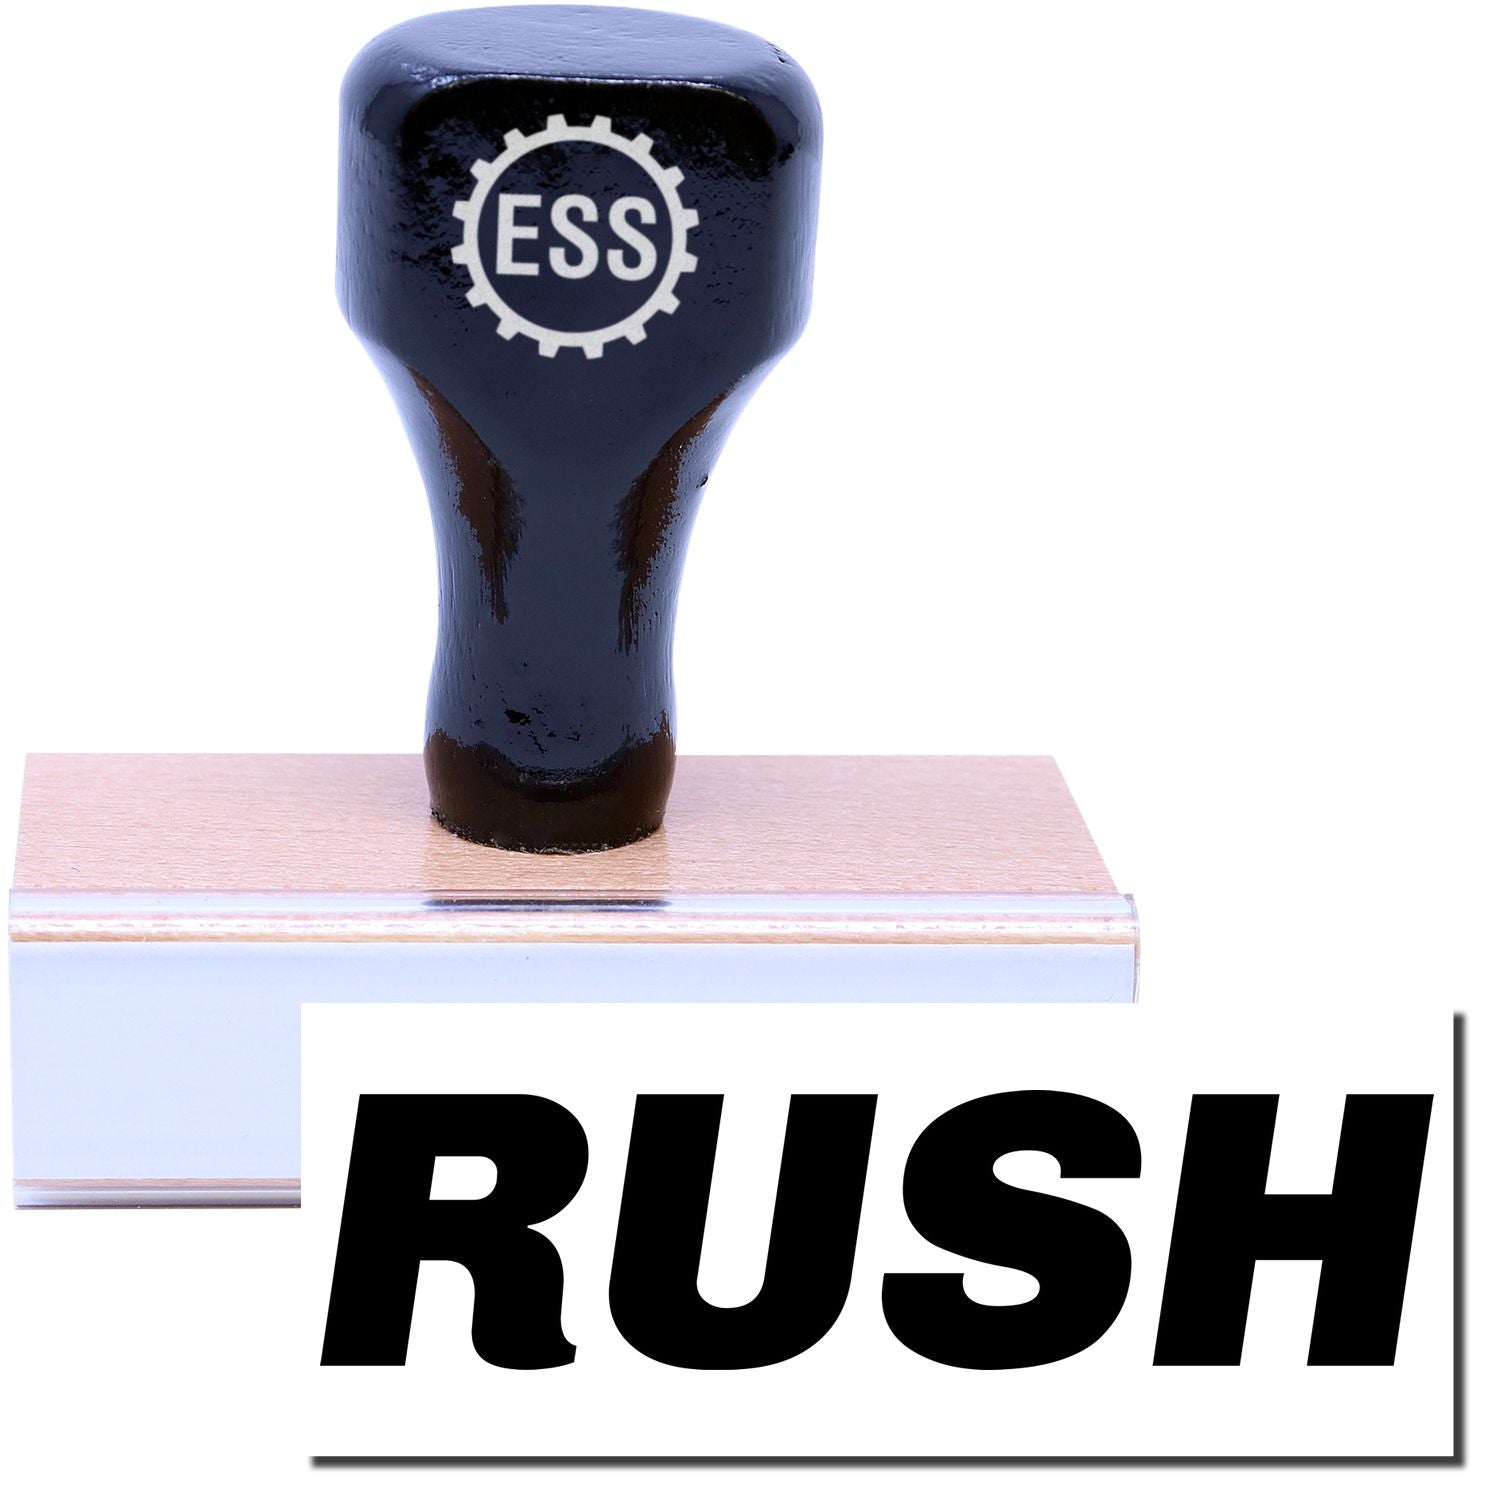 A stock office rubber stamp with a stamped image showing how the text "RUSH" in a large italic font is displayed after stamping.